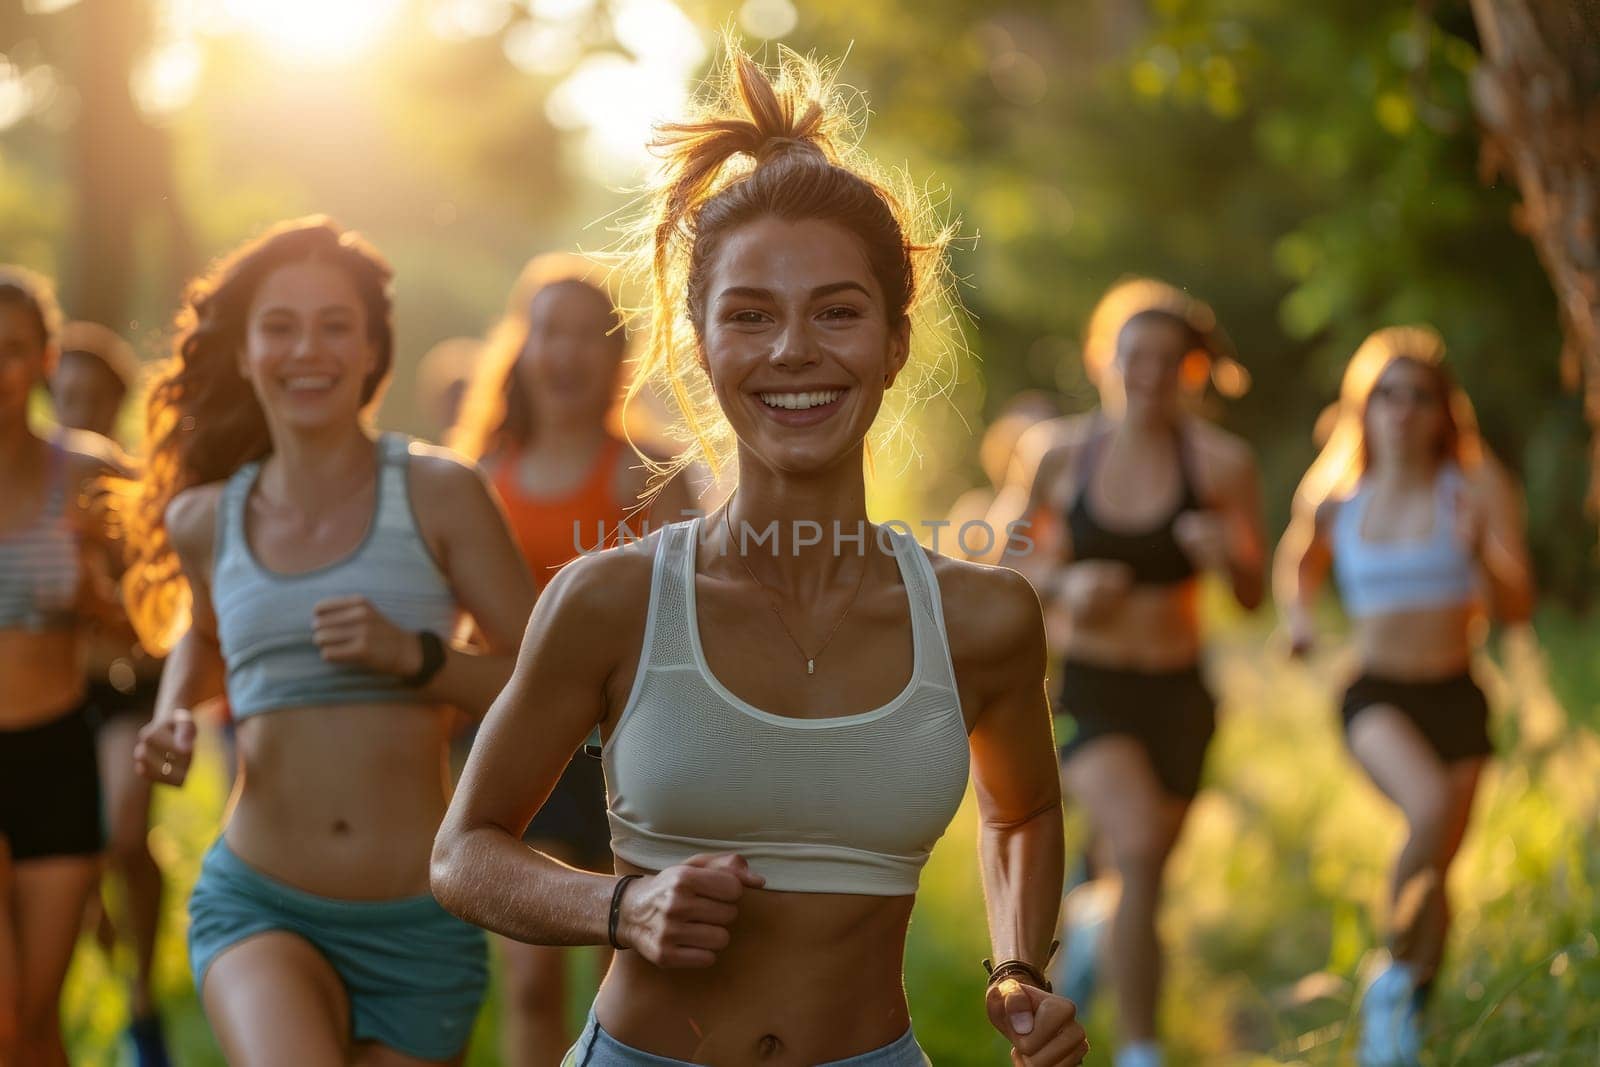 Group of Young Women Running Together Outdoors in Nature at Sunset. Fitness, Friends, and Fun